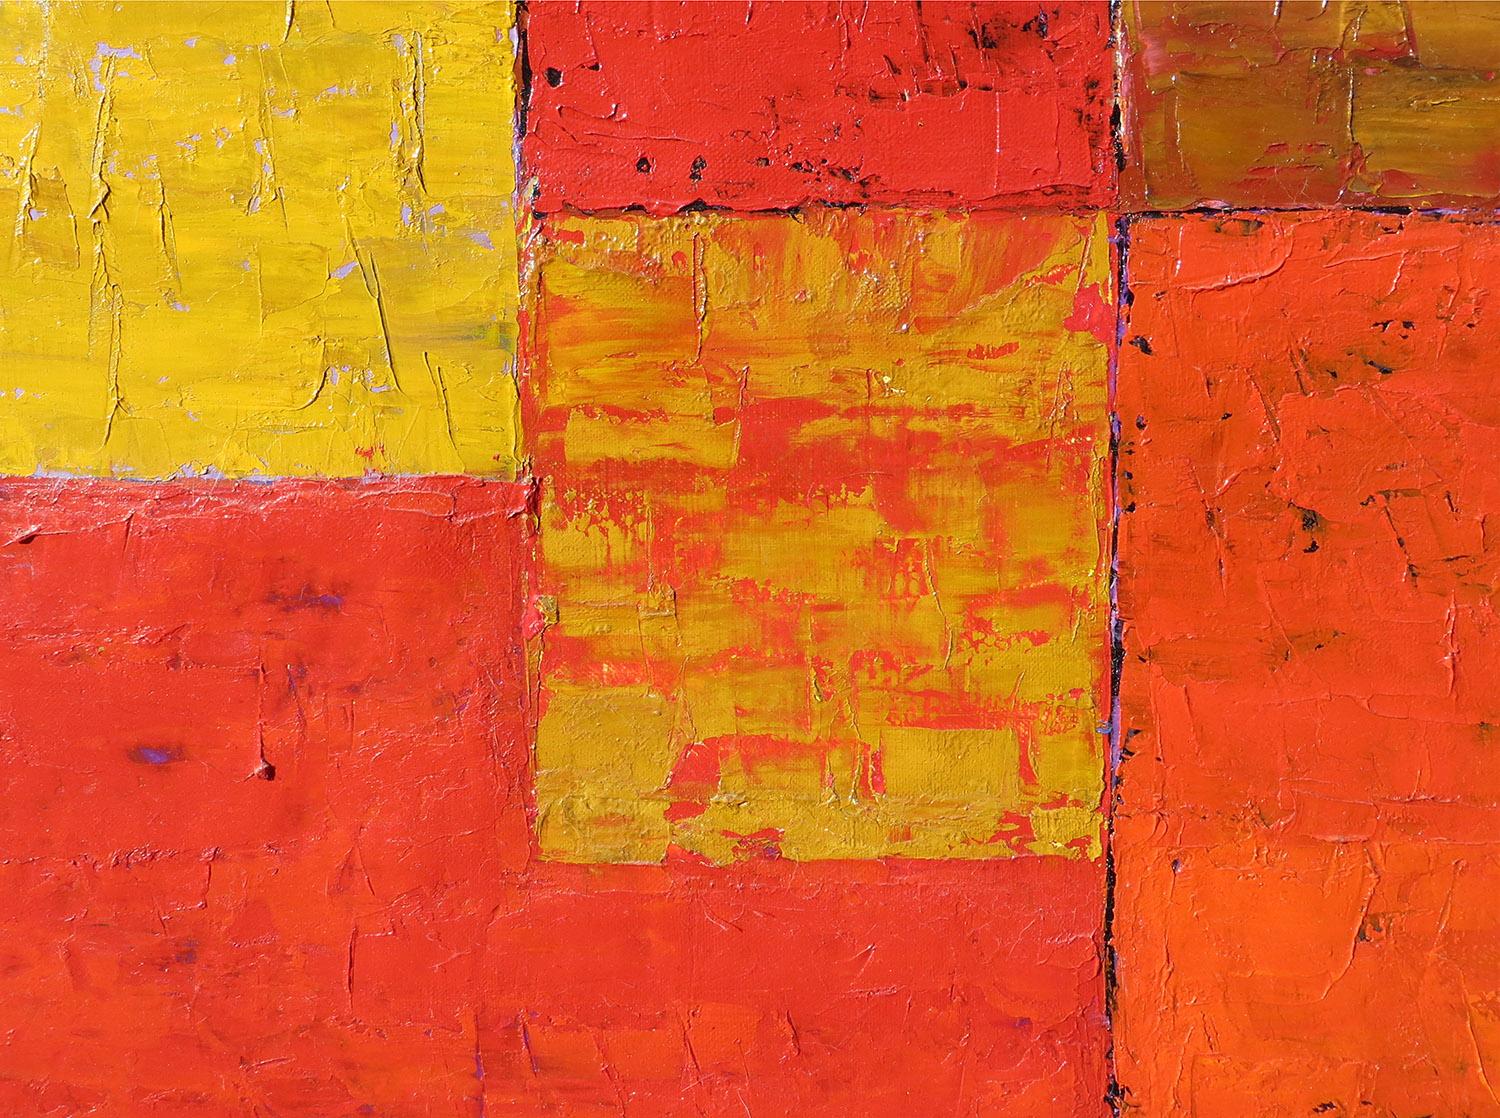 Vibrant shades of red, orange and yellow dominate this abstract oil painting by Alexandre Istrati.  Using geometric forms, this post-war abstract artist uses color to engage the viewer.  

Alexandre Istrati (French/Romanian, 1915-1991)
Sans titre,